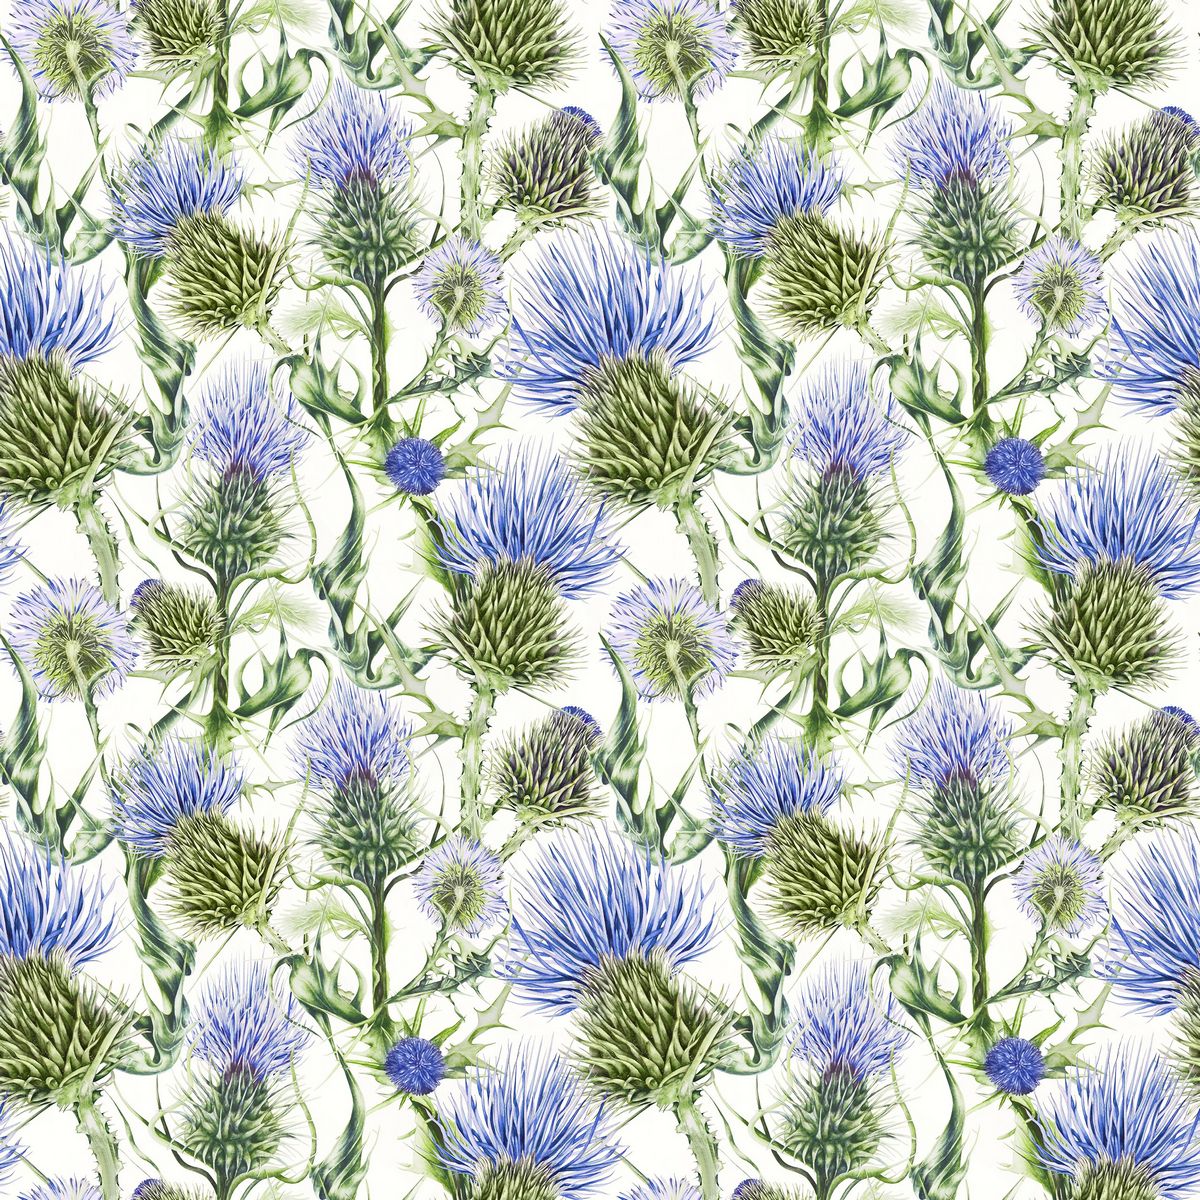 Penton Bluebell Fabric by Voyage Maison